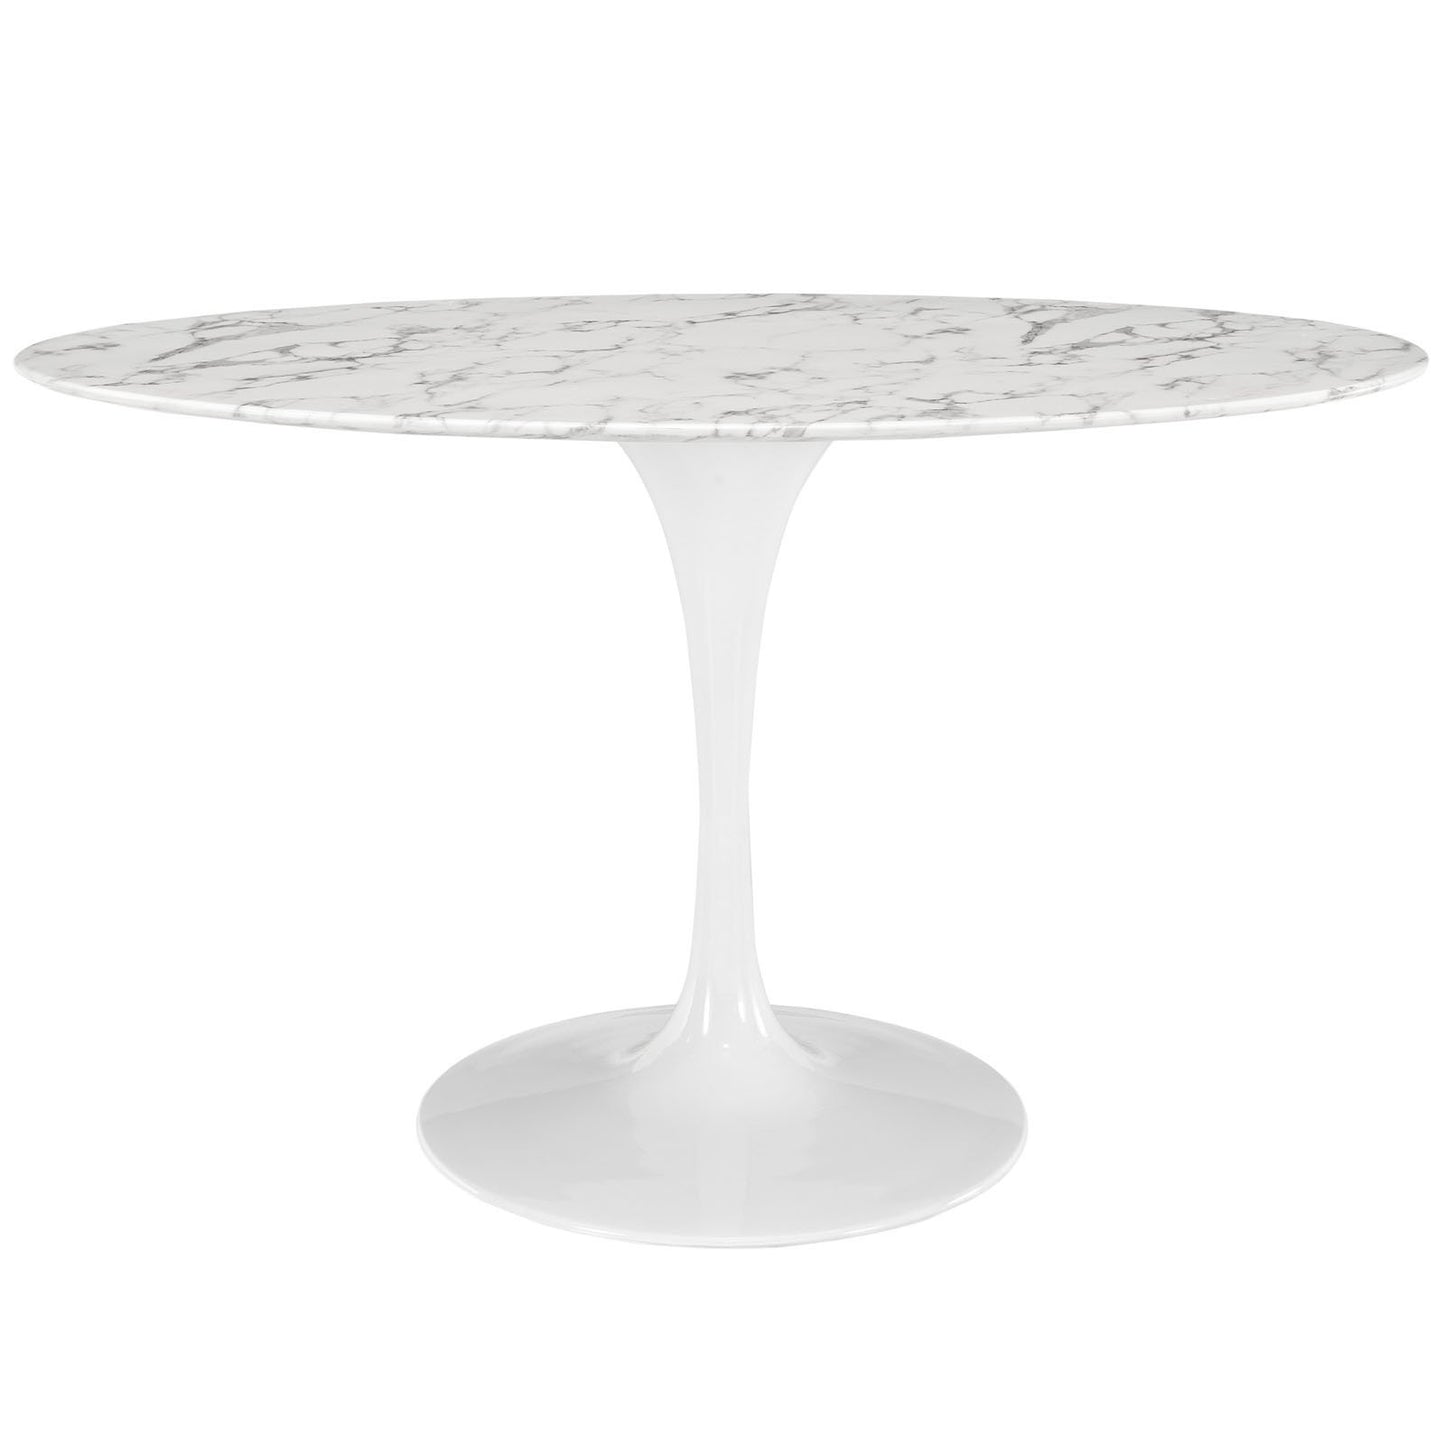 Tulip Style 54" Oval Marble Dining Table - living-essentials